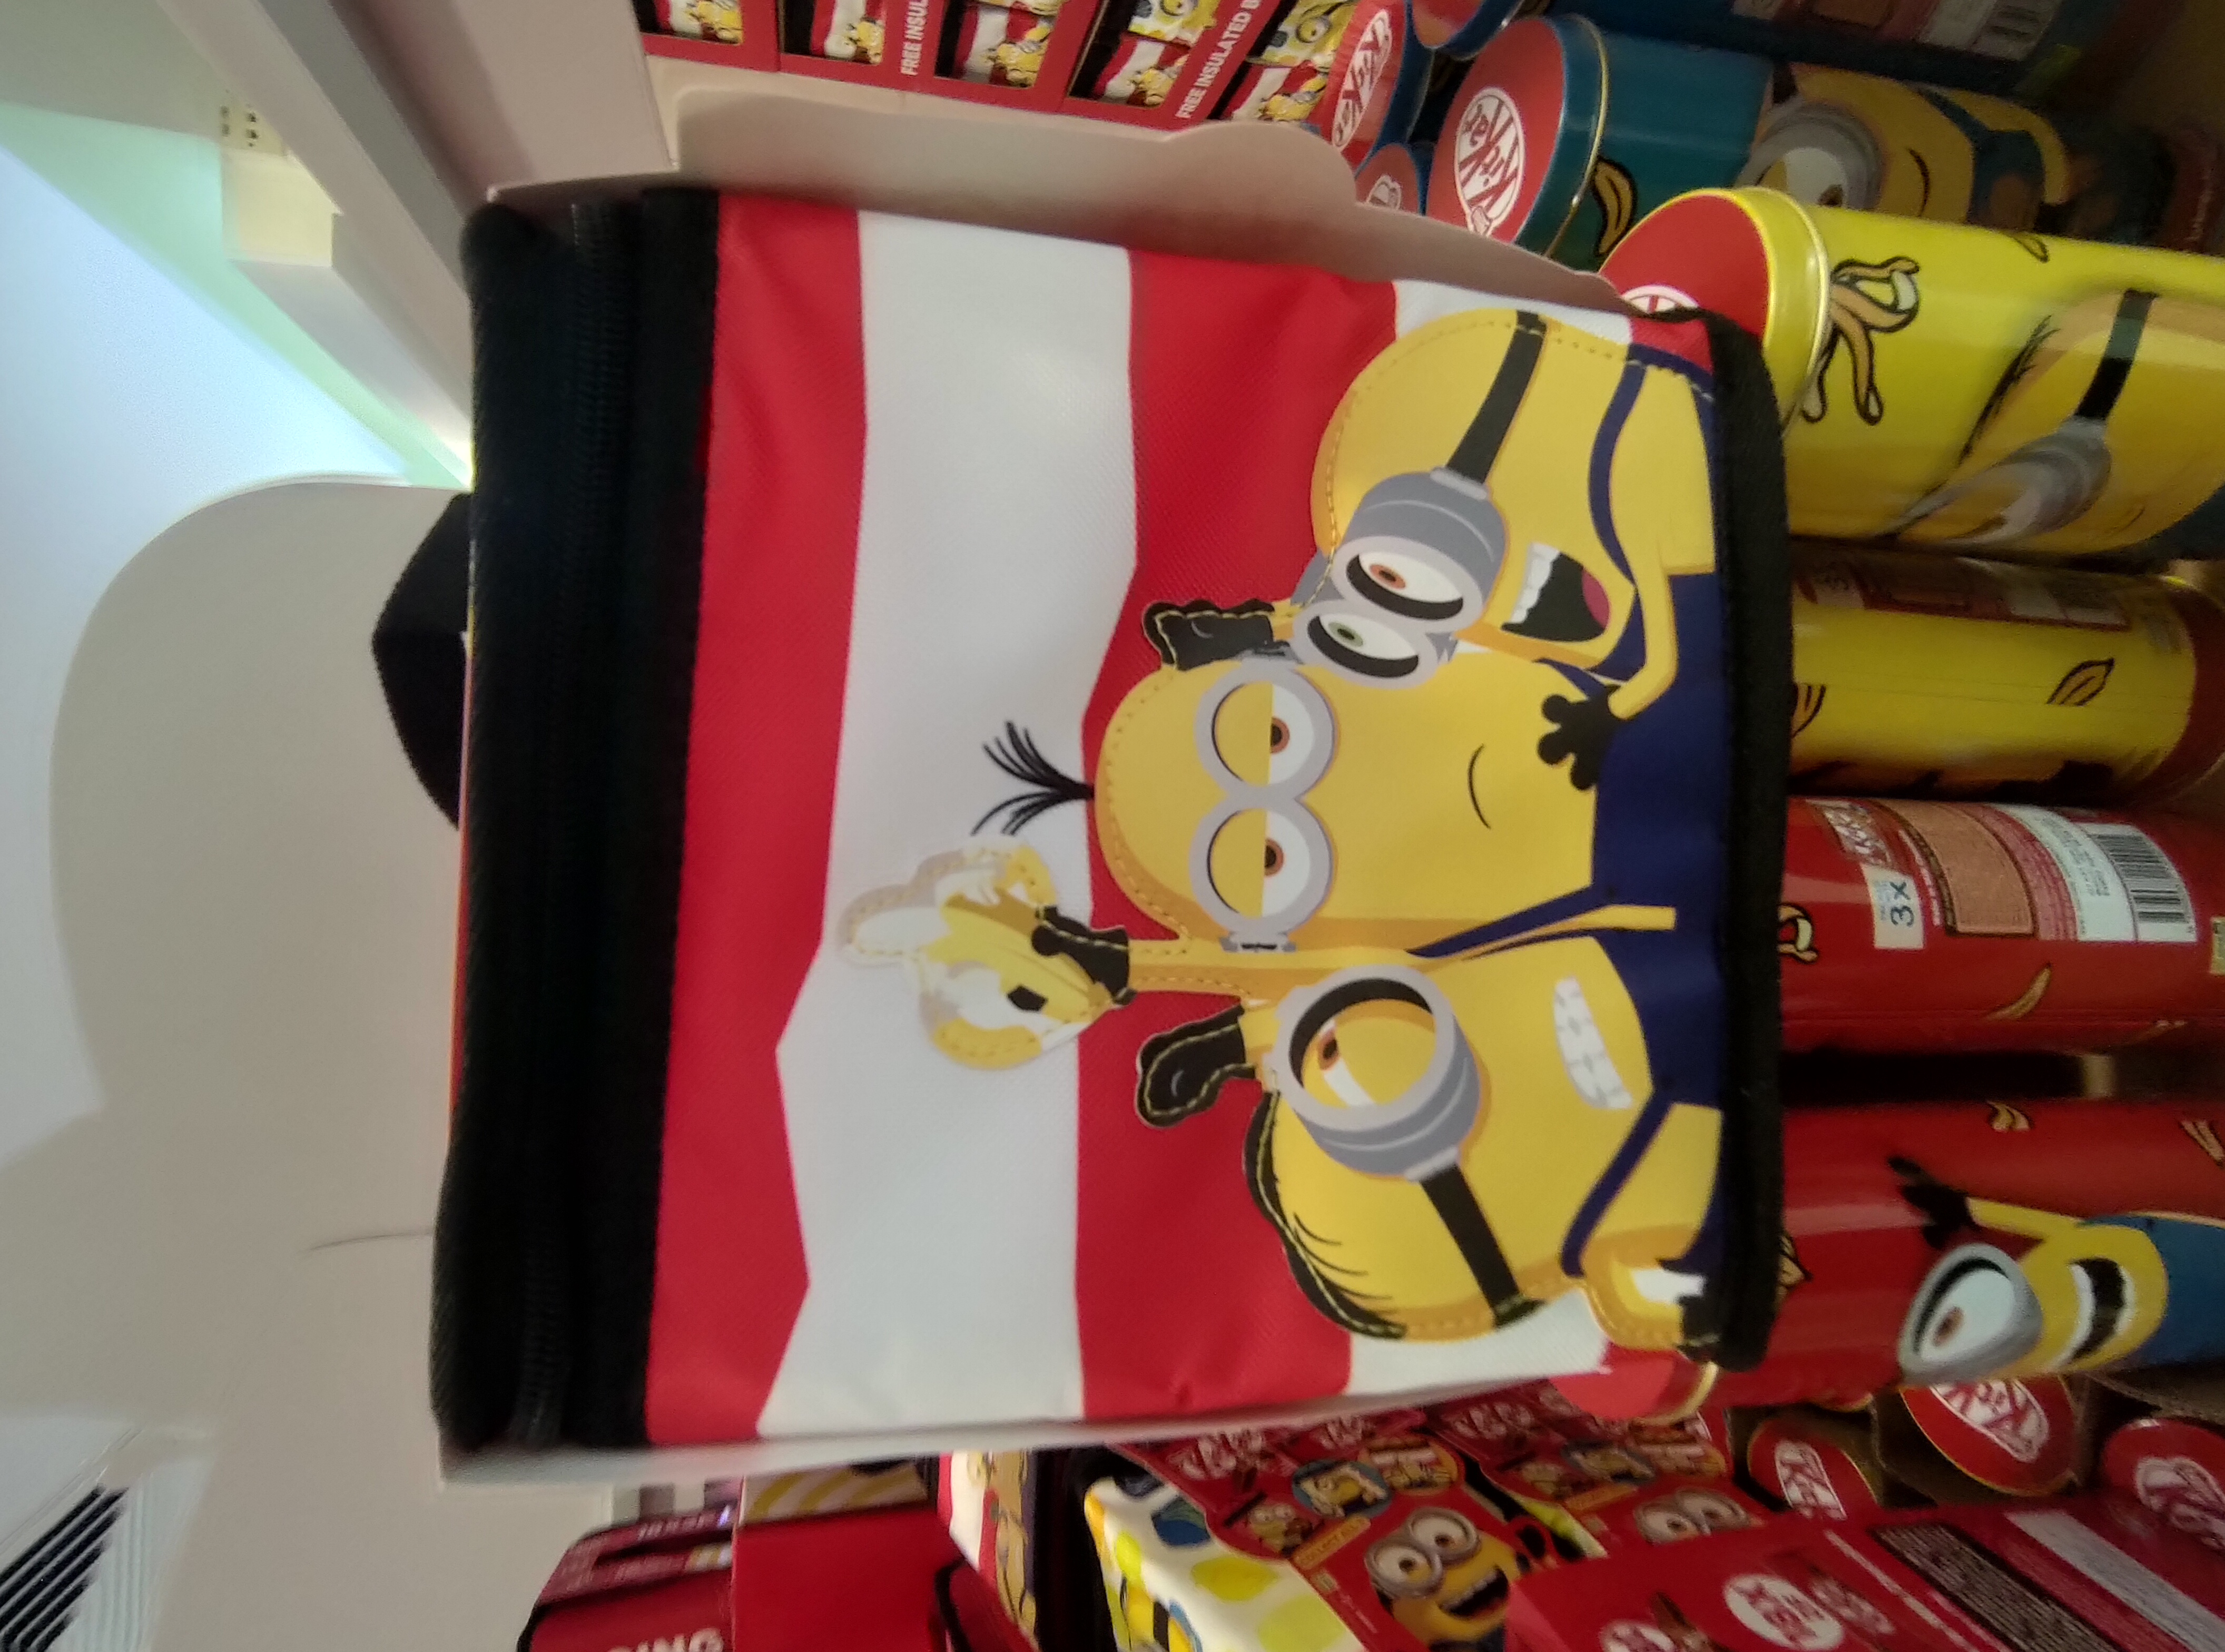 Free Limited Edition Minion Cooler Bag when you purchase Kit Kat at FairPrice - 3